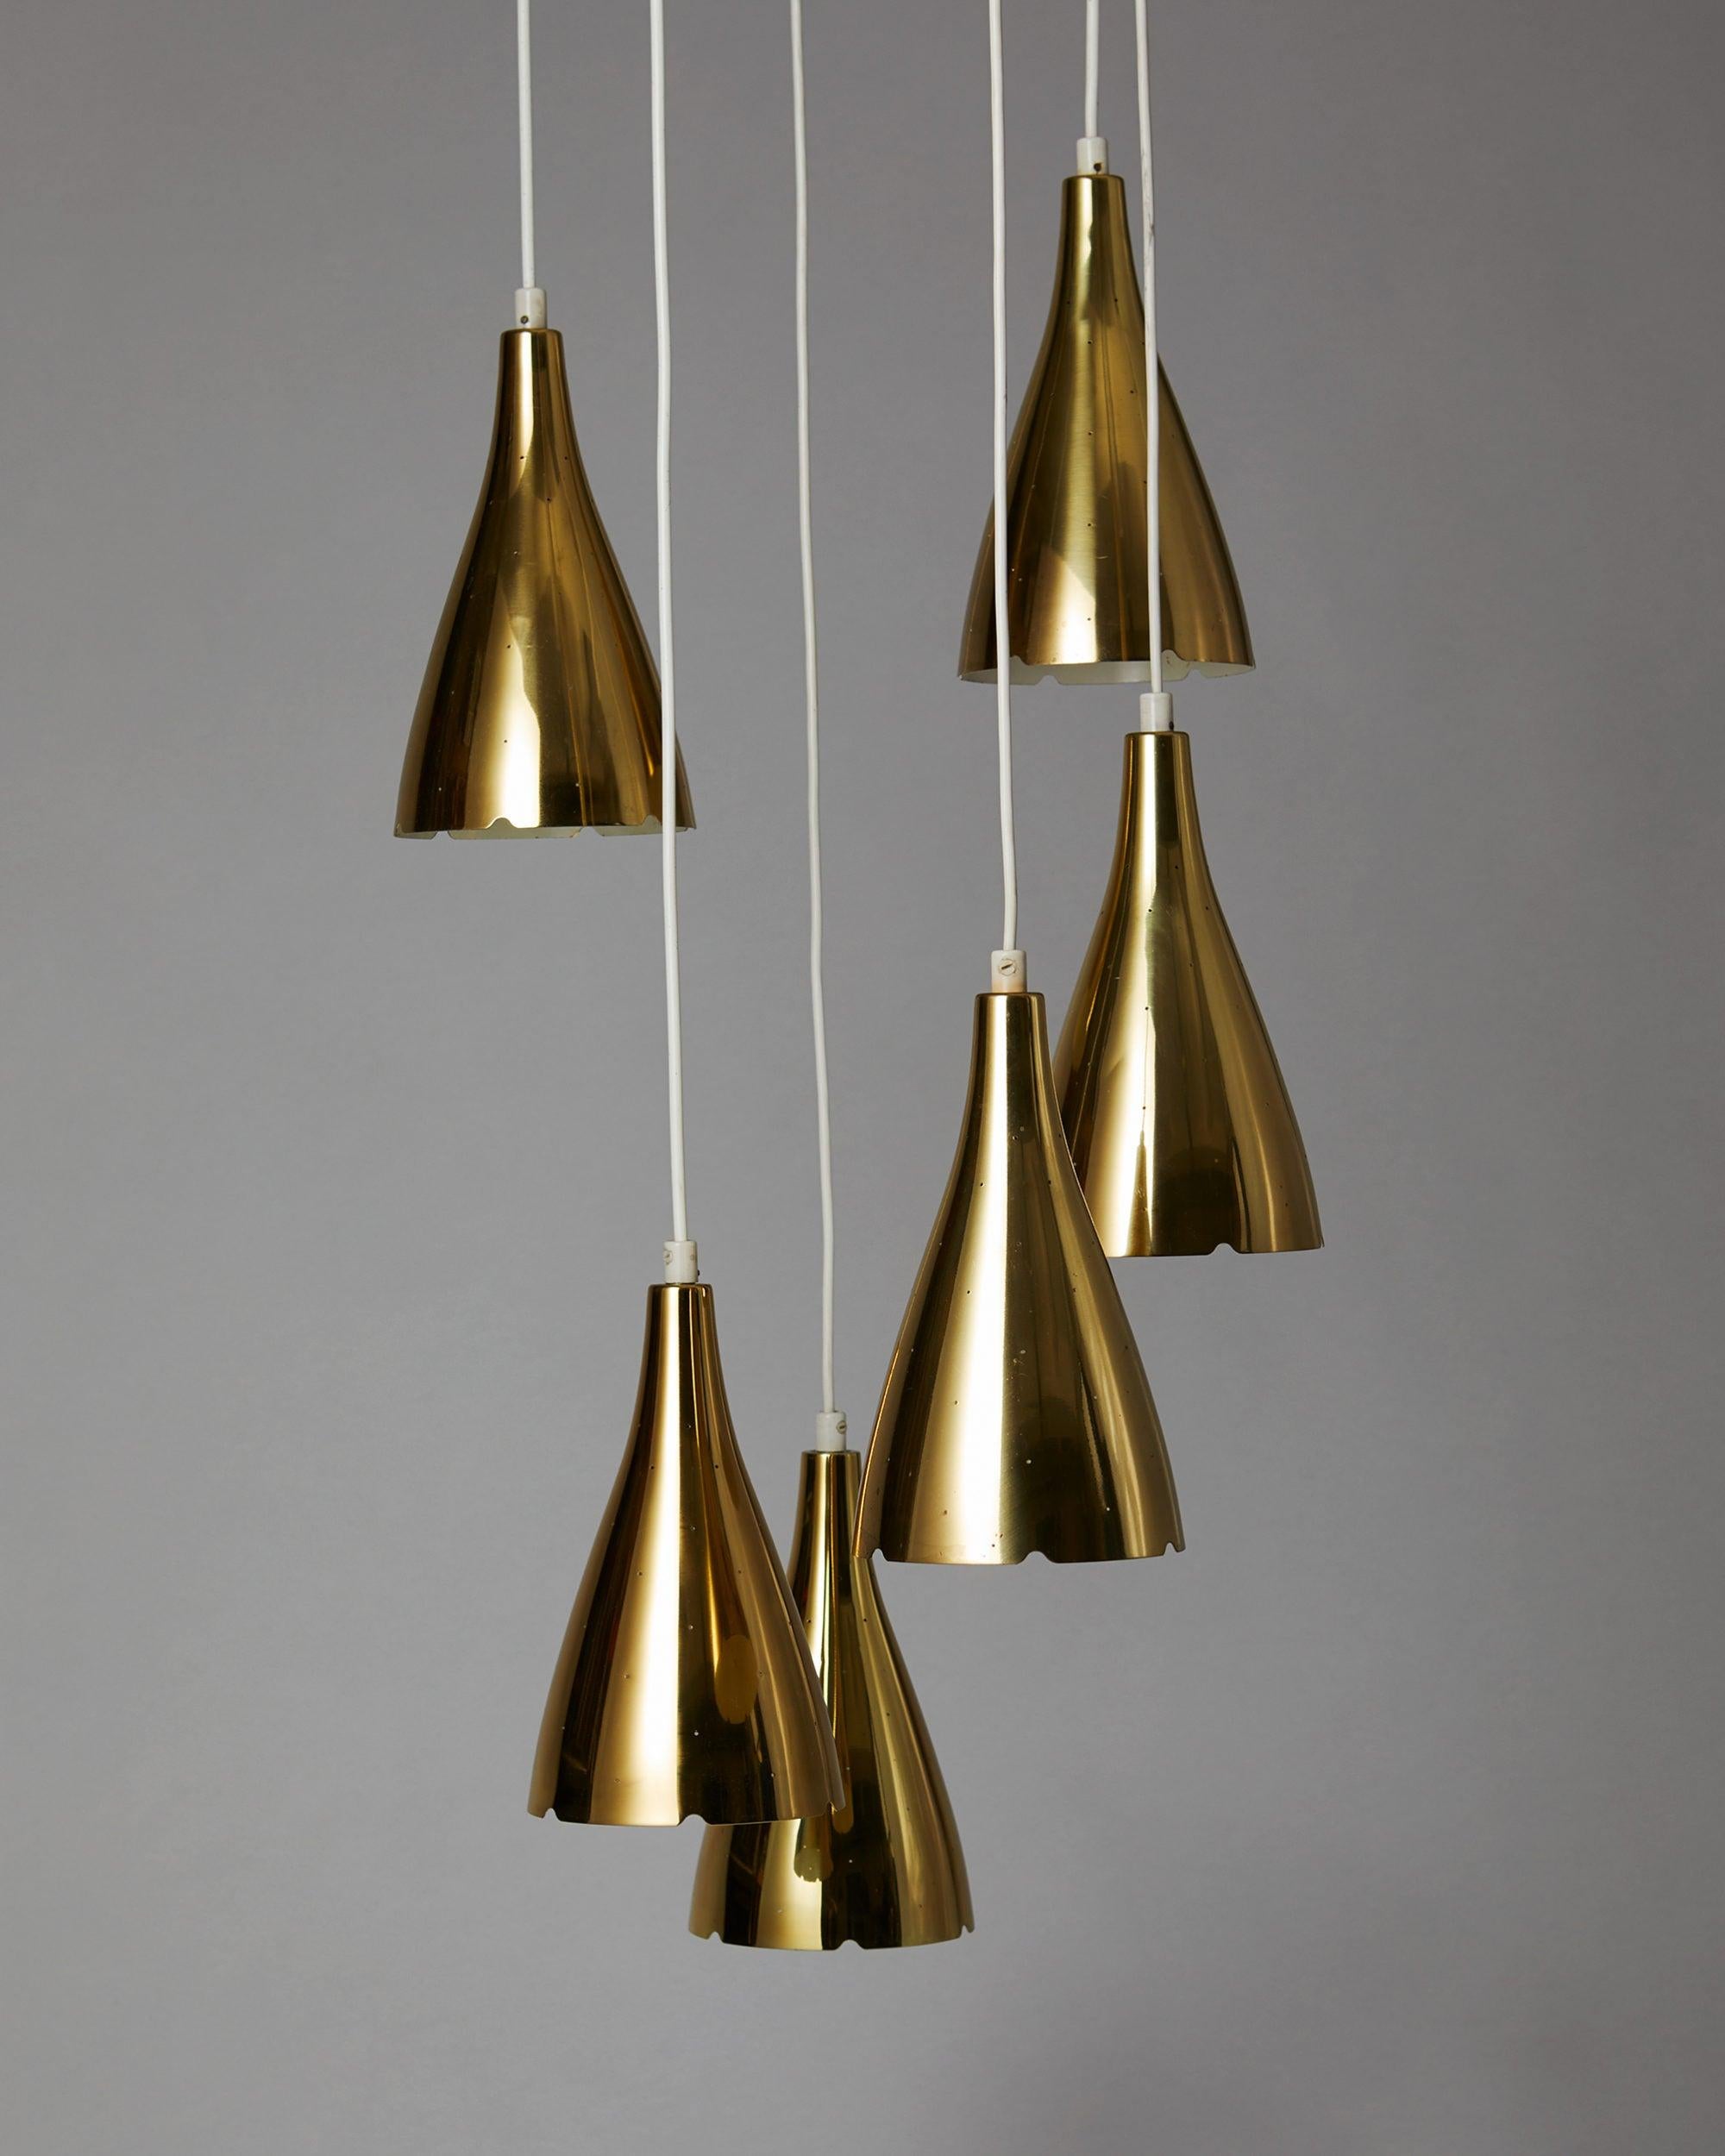 Ceiling lamp model 1994-1996 designed by Paavo Tynell for Taito Oy, Finland, 1953.

Brass with fabric cord.

Drop height variable.
Measures: Shade diameter 15 cm/ 6